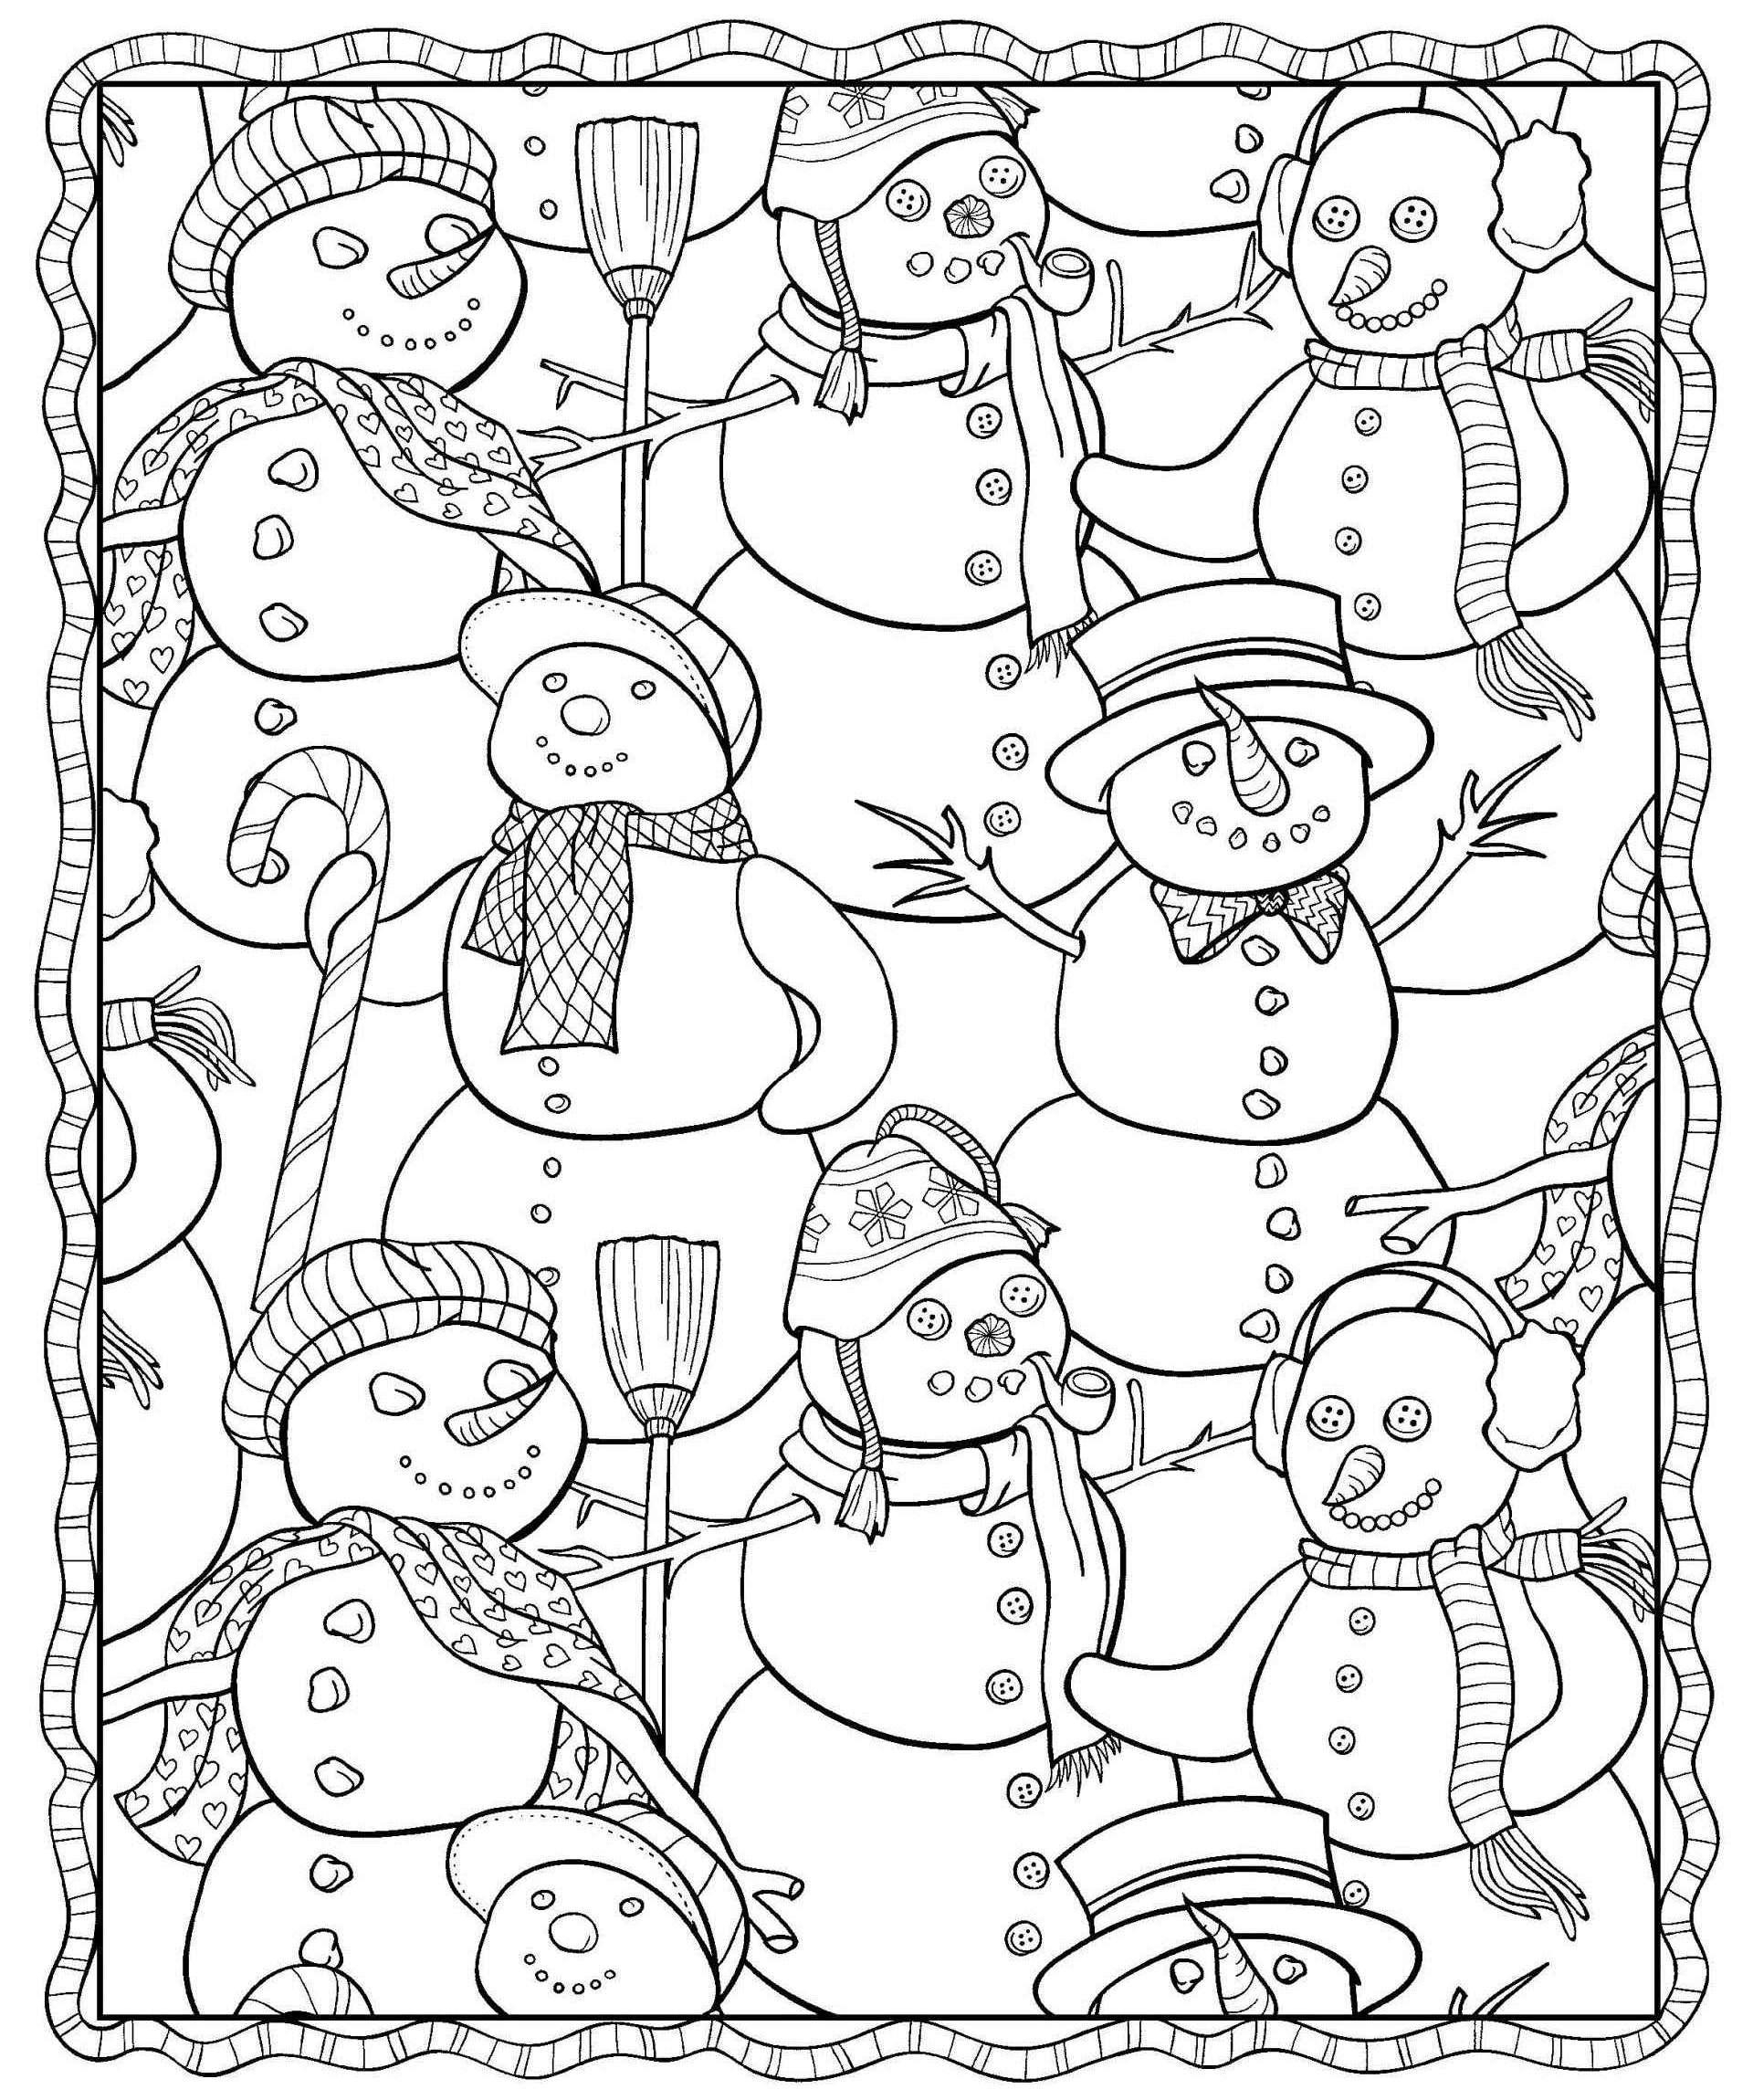 Coloring Pages Of Snowmen Multiple Snowman Coloring Pages 1920 X 2300 56586 Kb